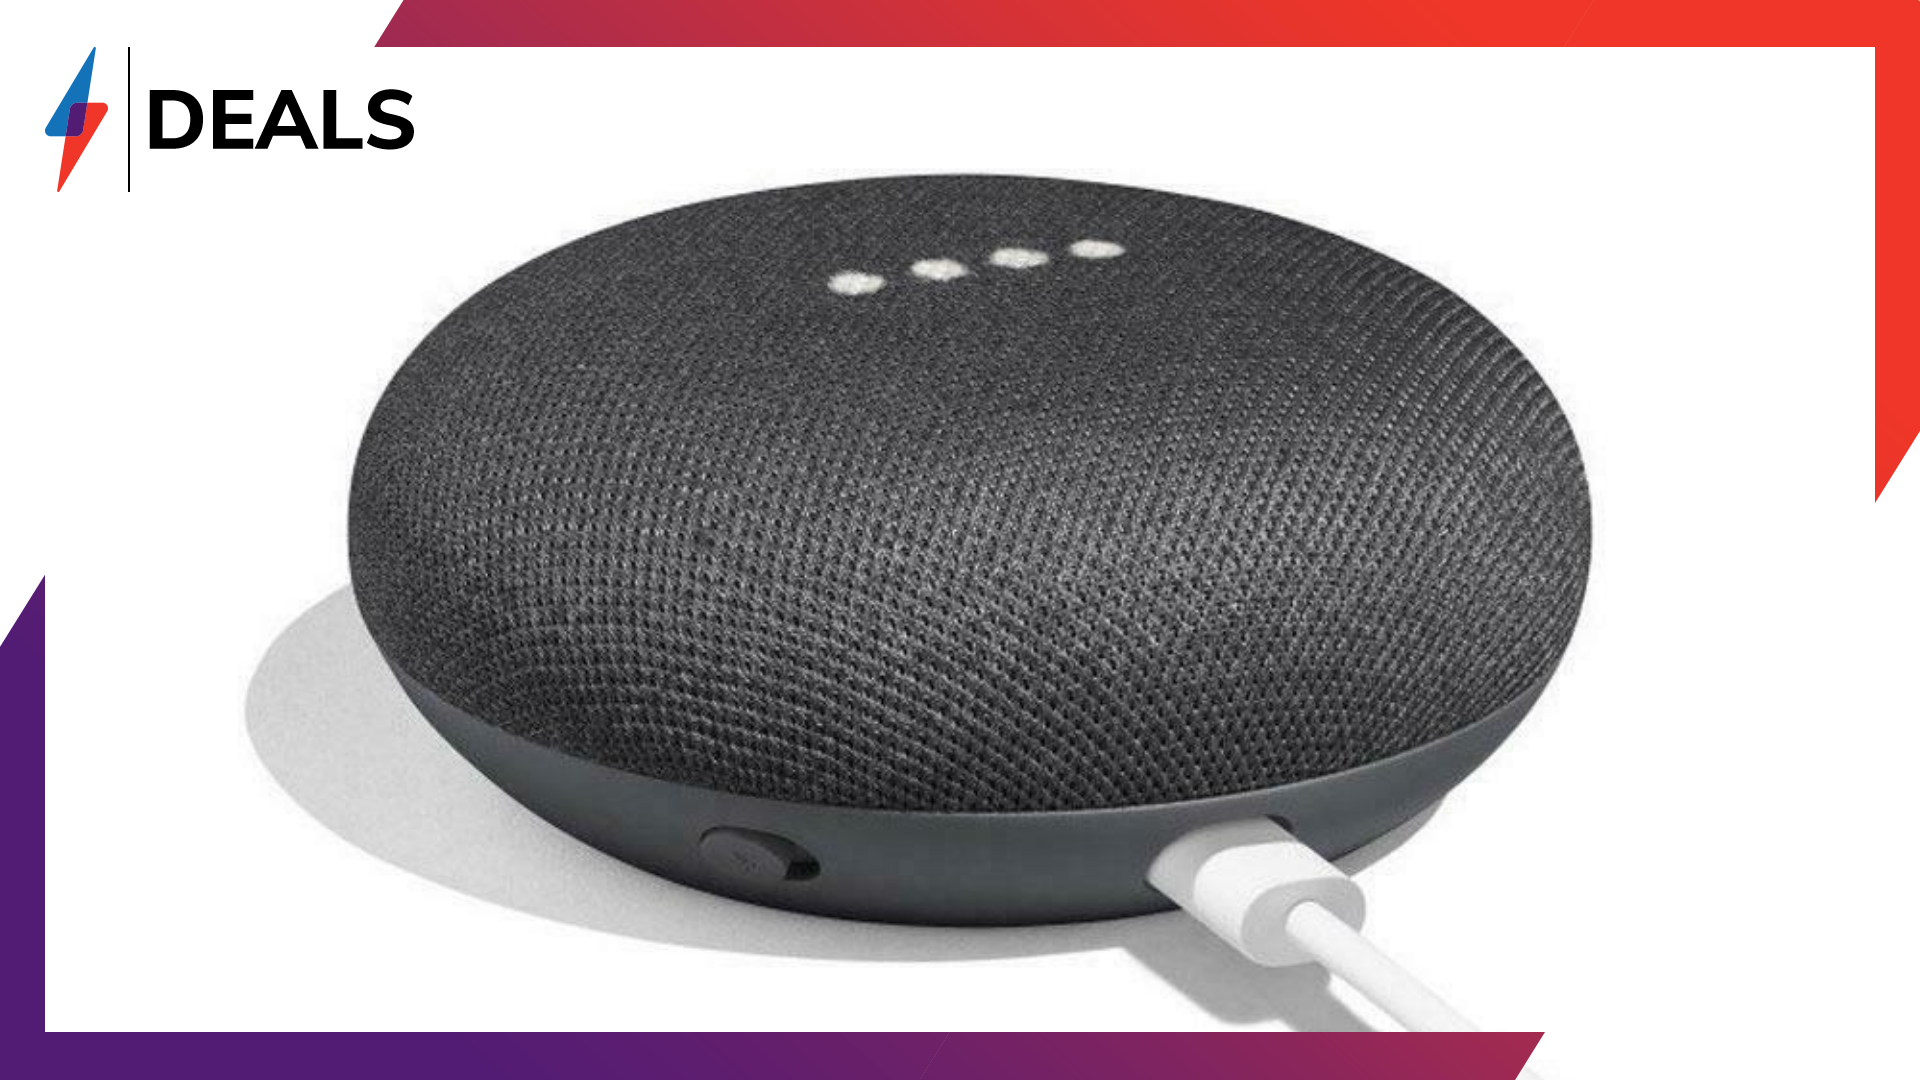 Need a cheap smart speaker? The Google Home Mini is £15.99 right now